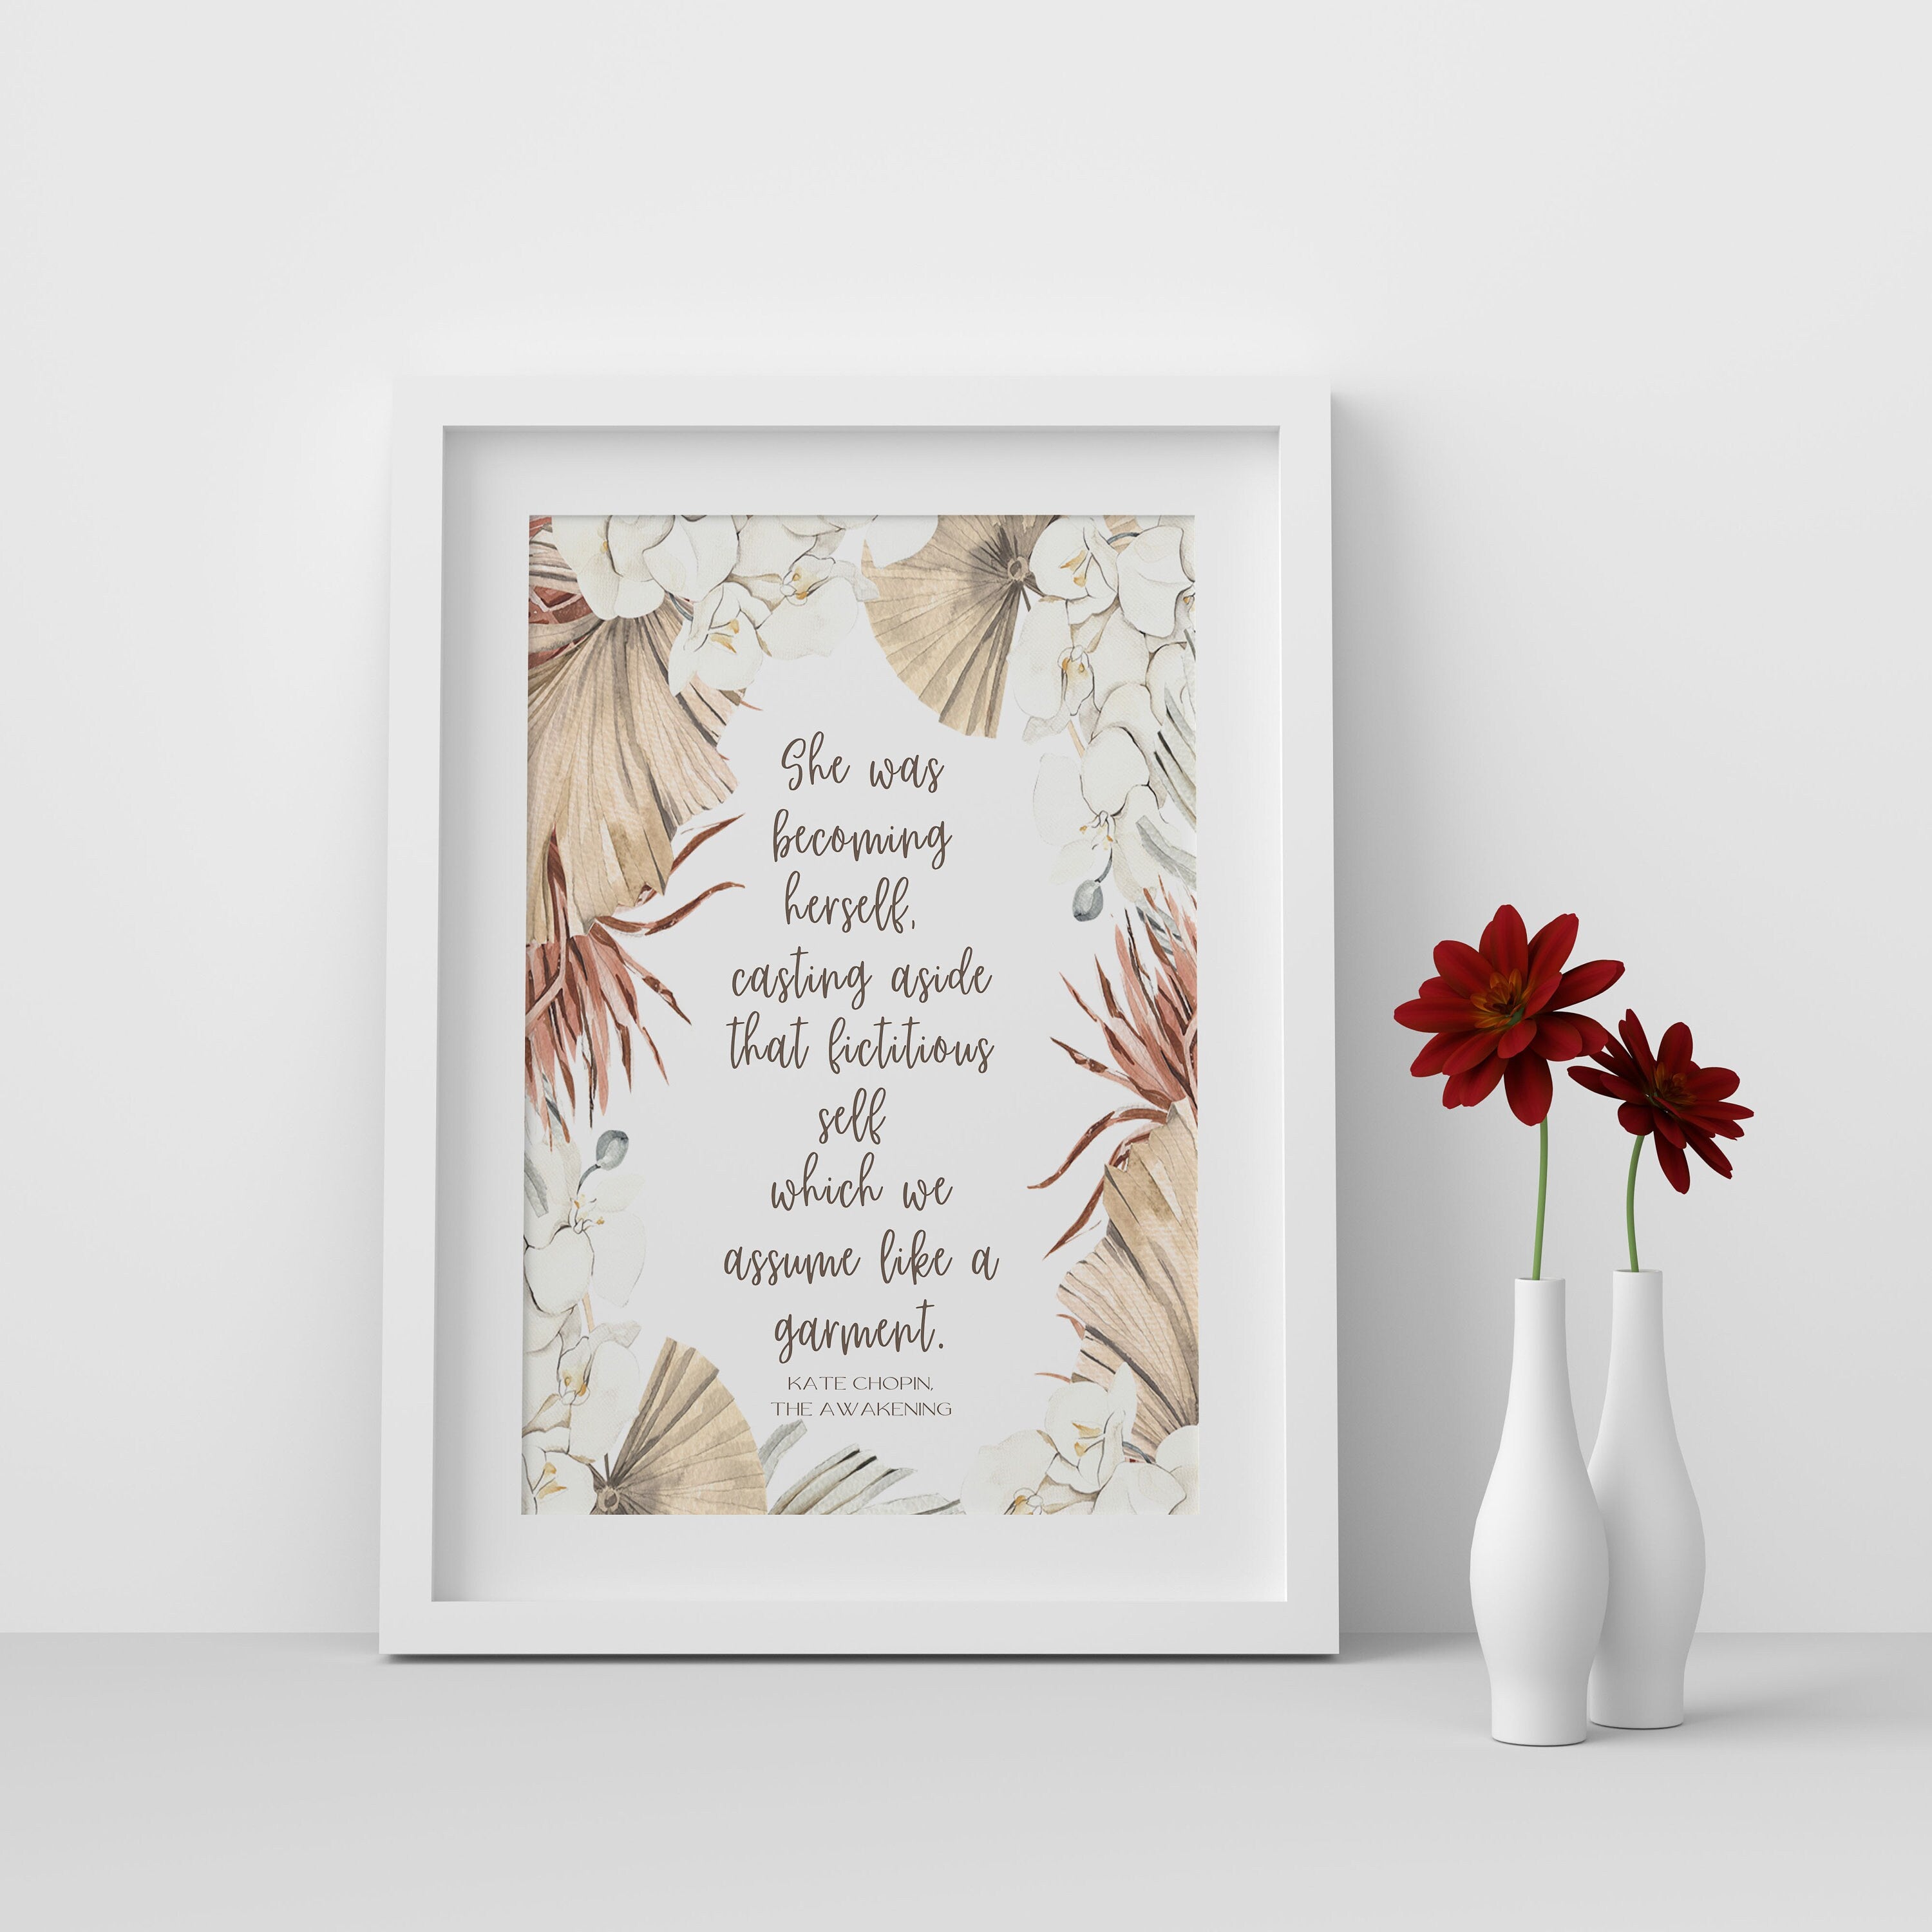 She Was Becoming Herself The Awakening Quote Inspirational Print Gift, Kate Chopin Unframed Feminist Typography Print in Neutral Colors